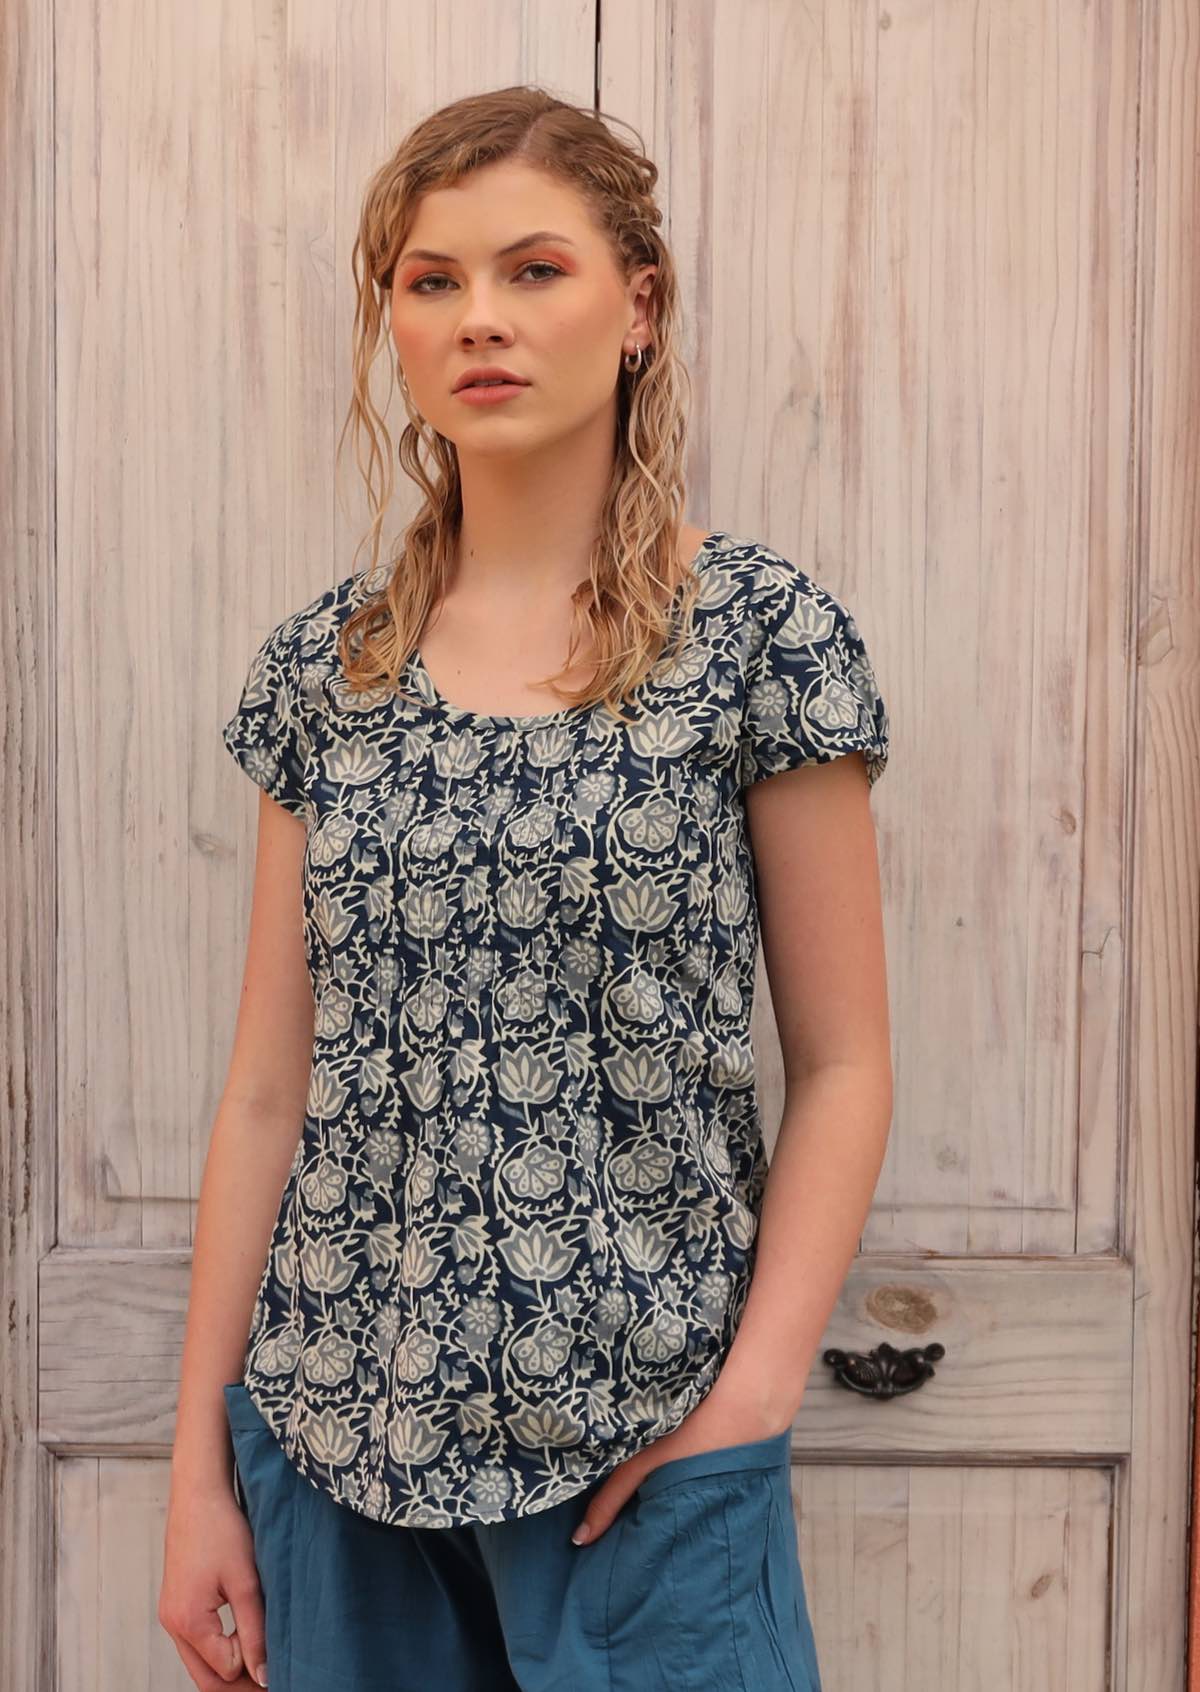 Model wears a blue based cotton top with a white floral print.